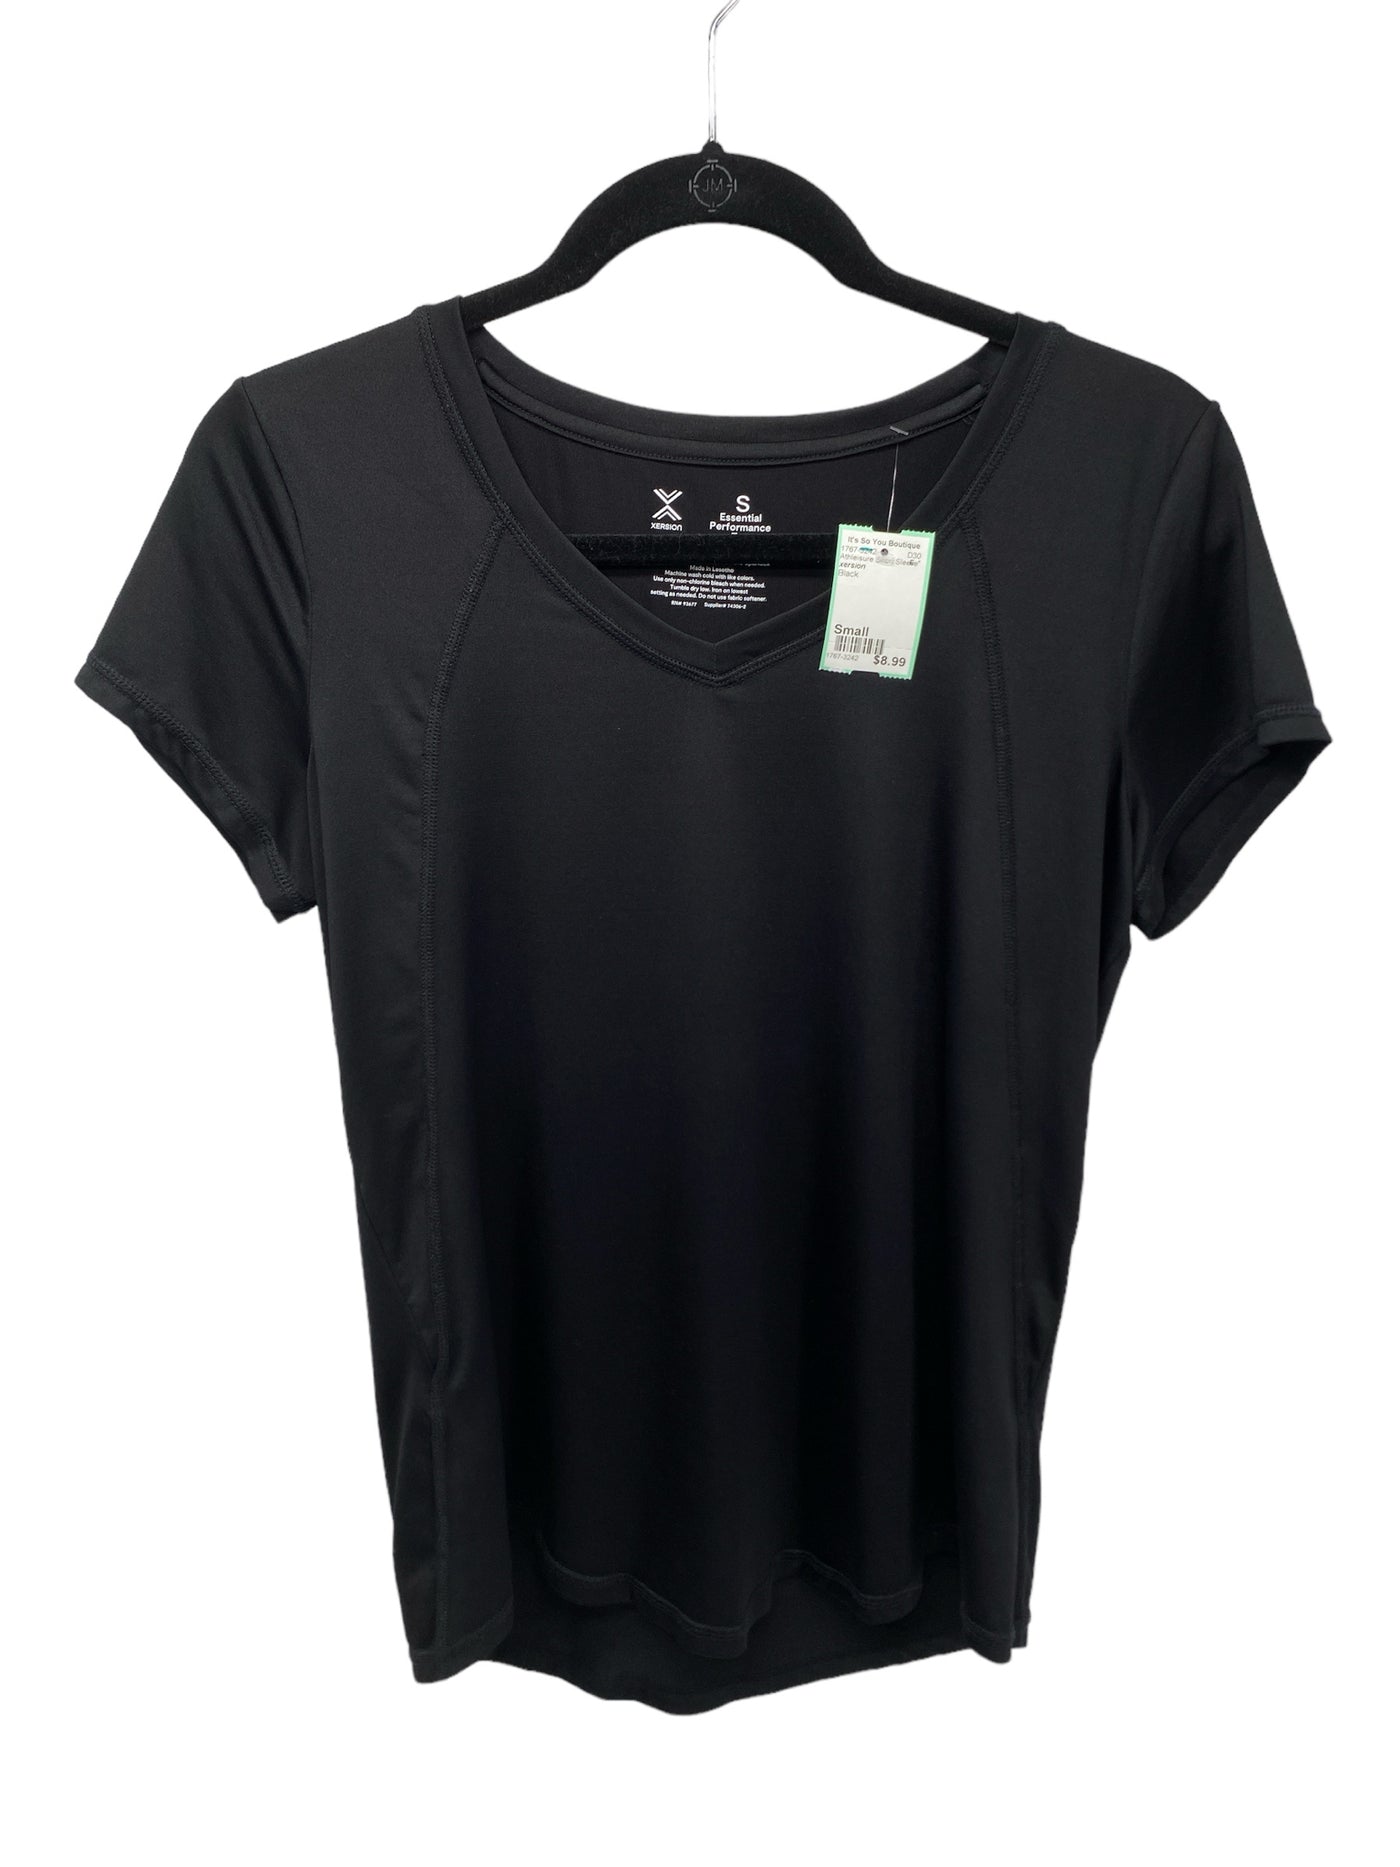 xersion Misses Size Small Black Athleisure Short Sleeve